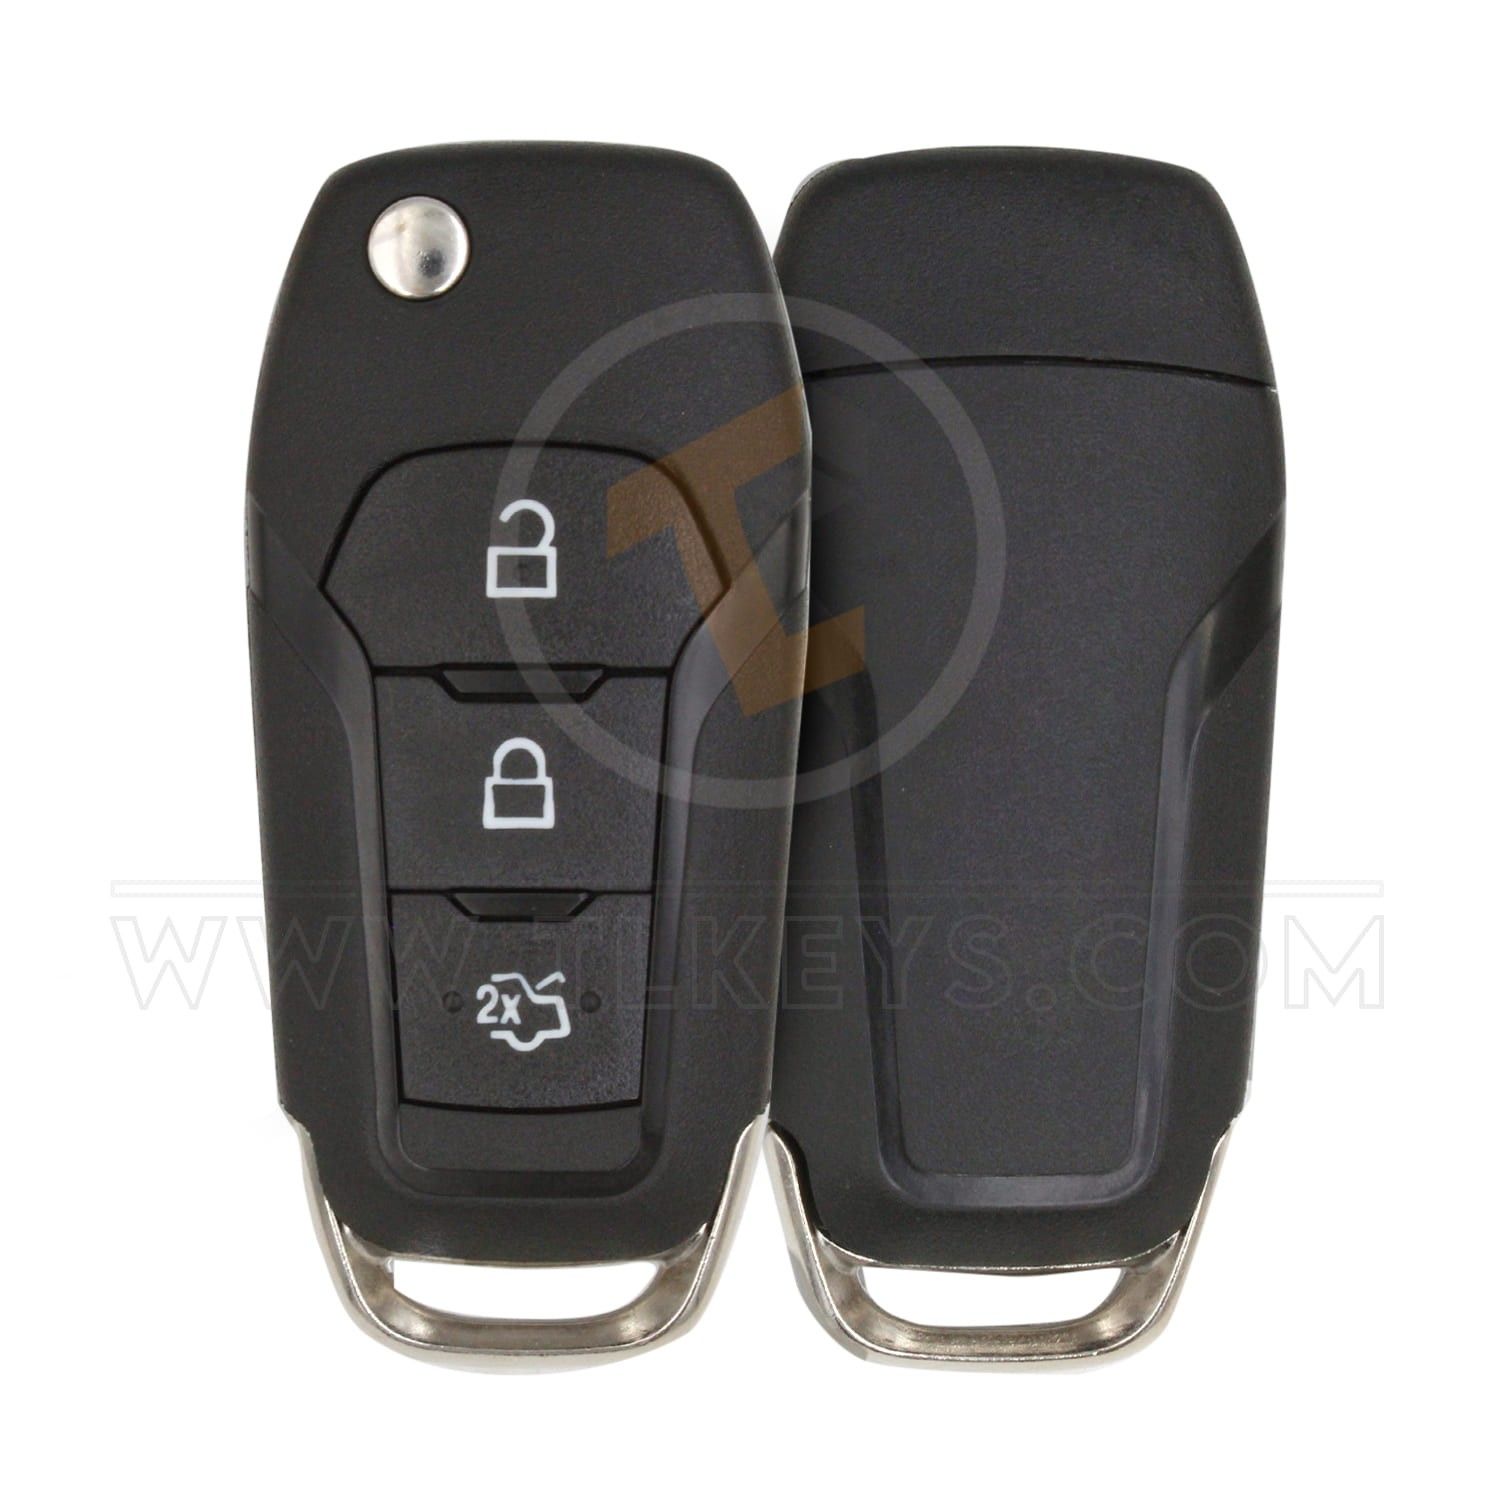 Ford Mondeo, Fiesta 2015-2019 3B Flip Remote Shell Buttons 3